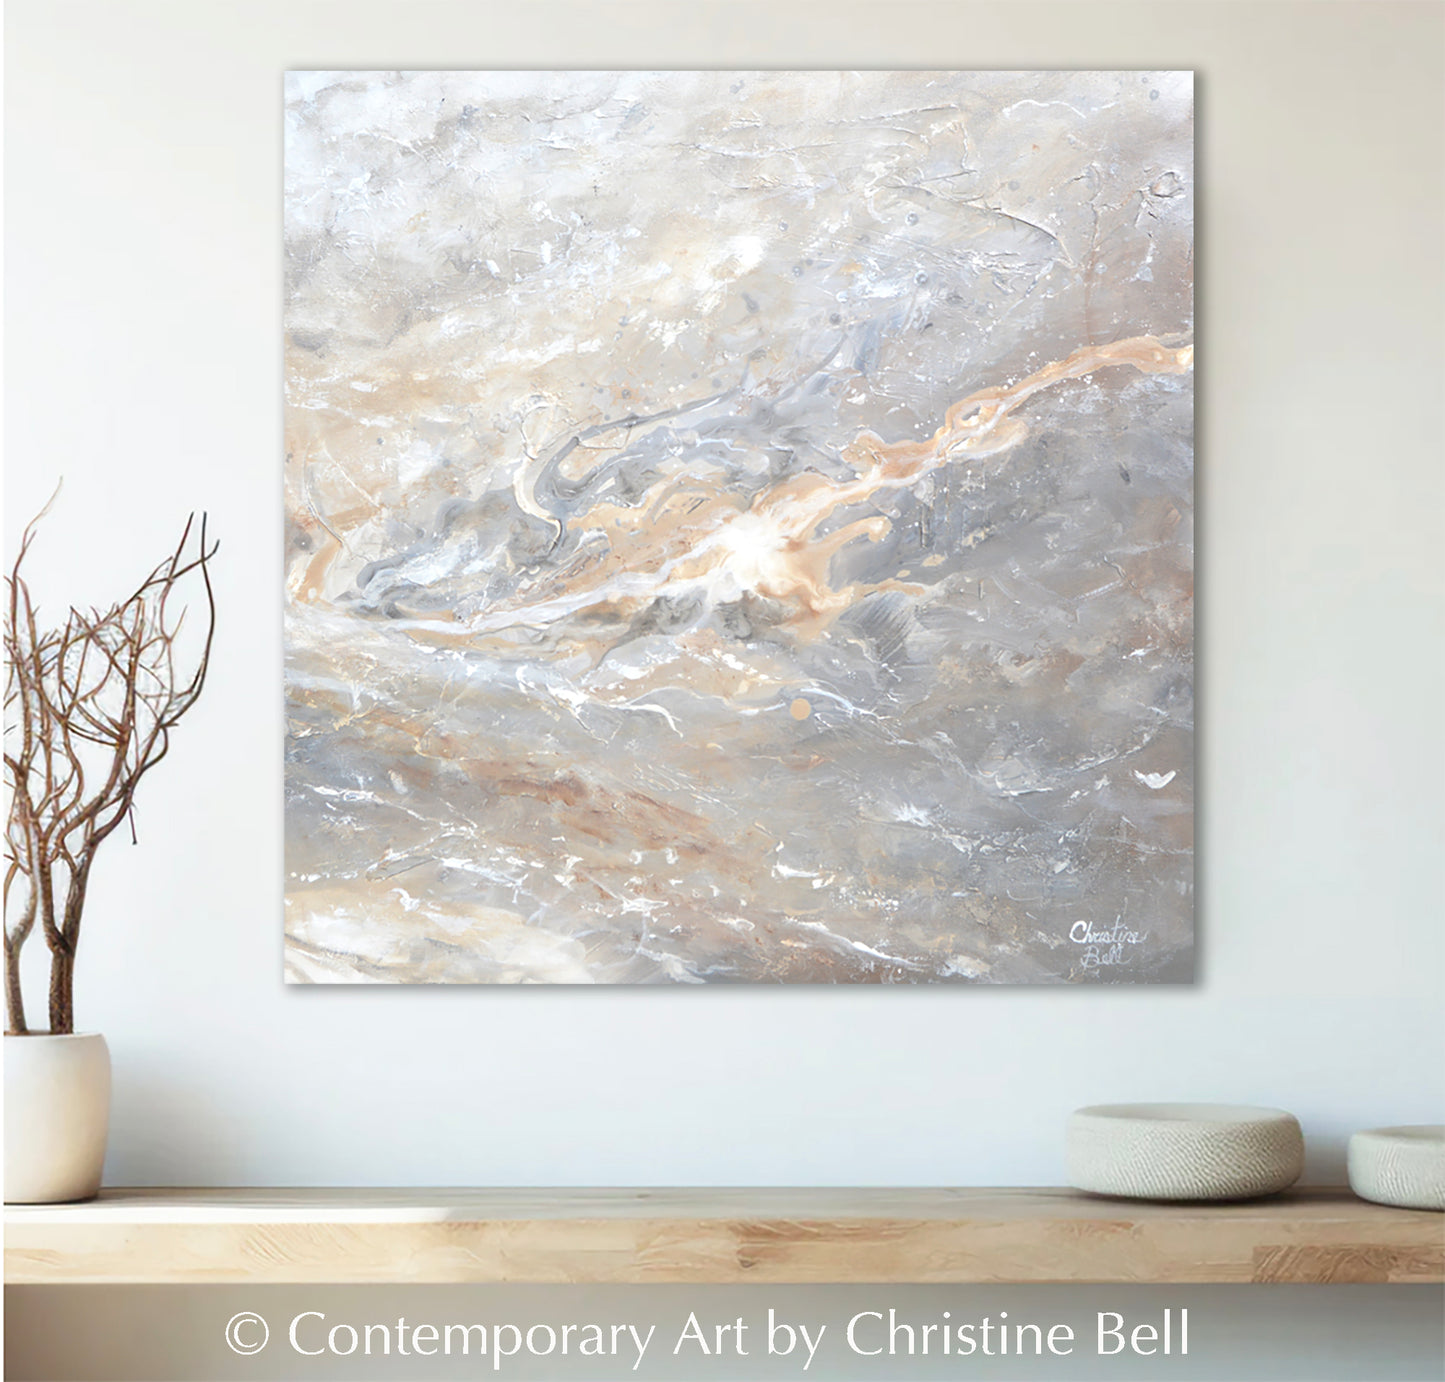 Shop Minimalist Abstract Paintings Textured Fine Art Palette Knife Paintings and Prints Coastal Wall Art Home Decor by Artist, Christine Bell